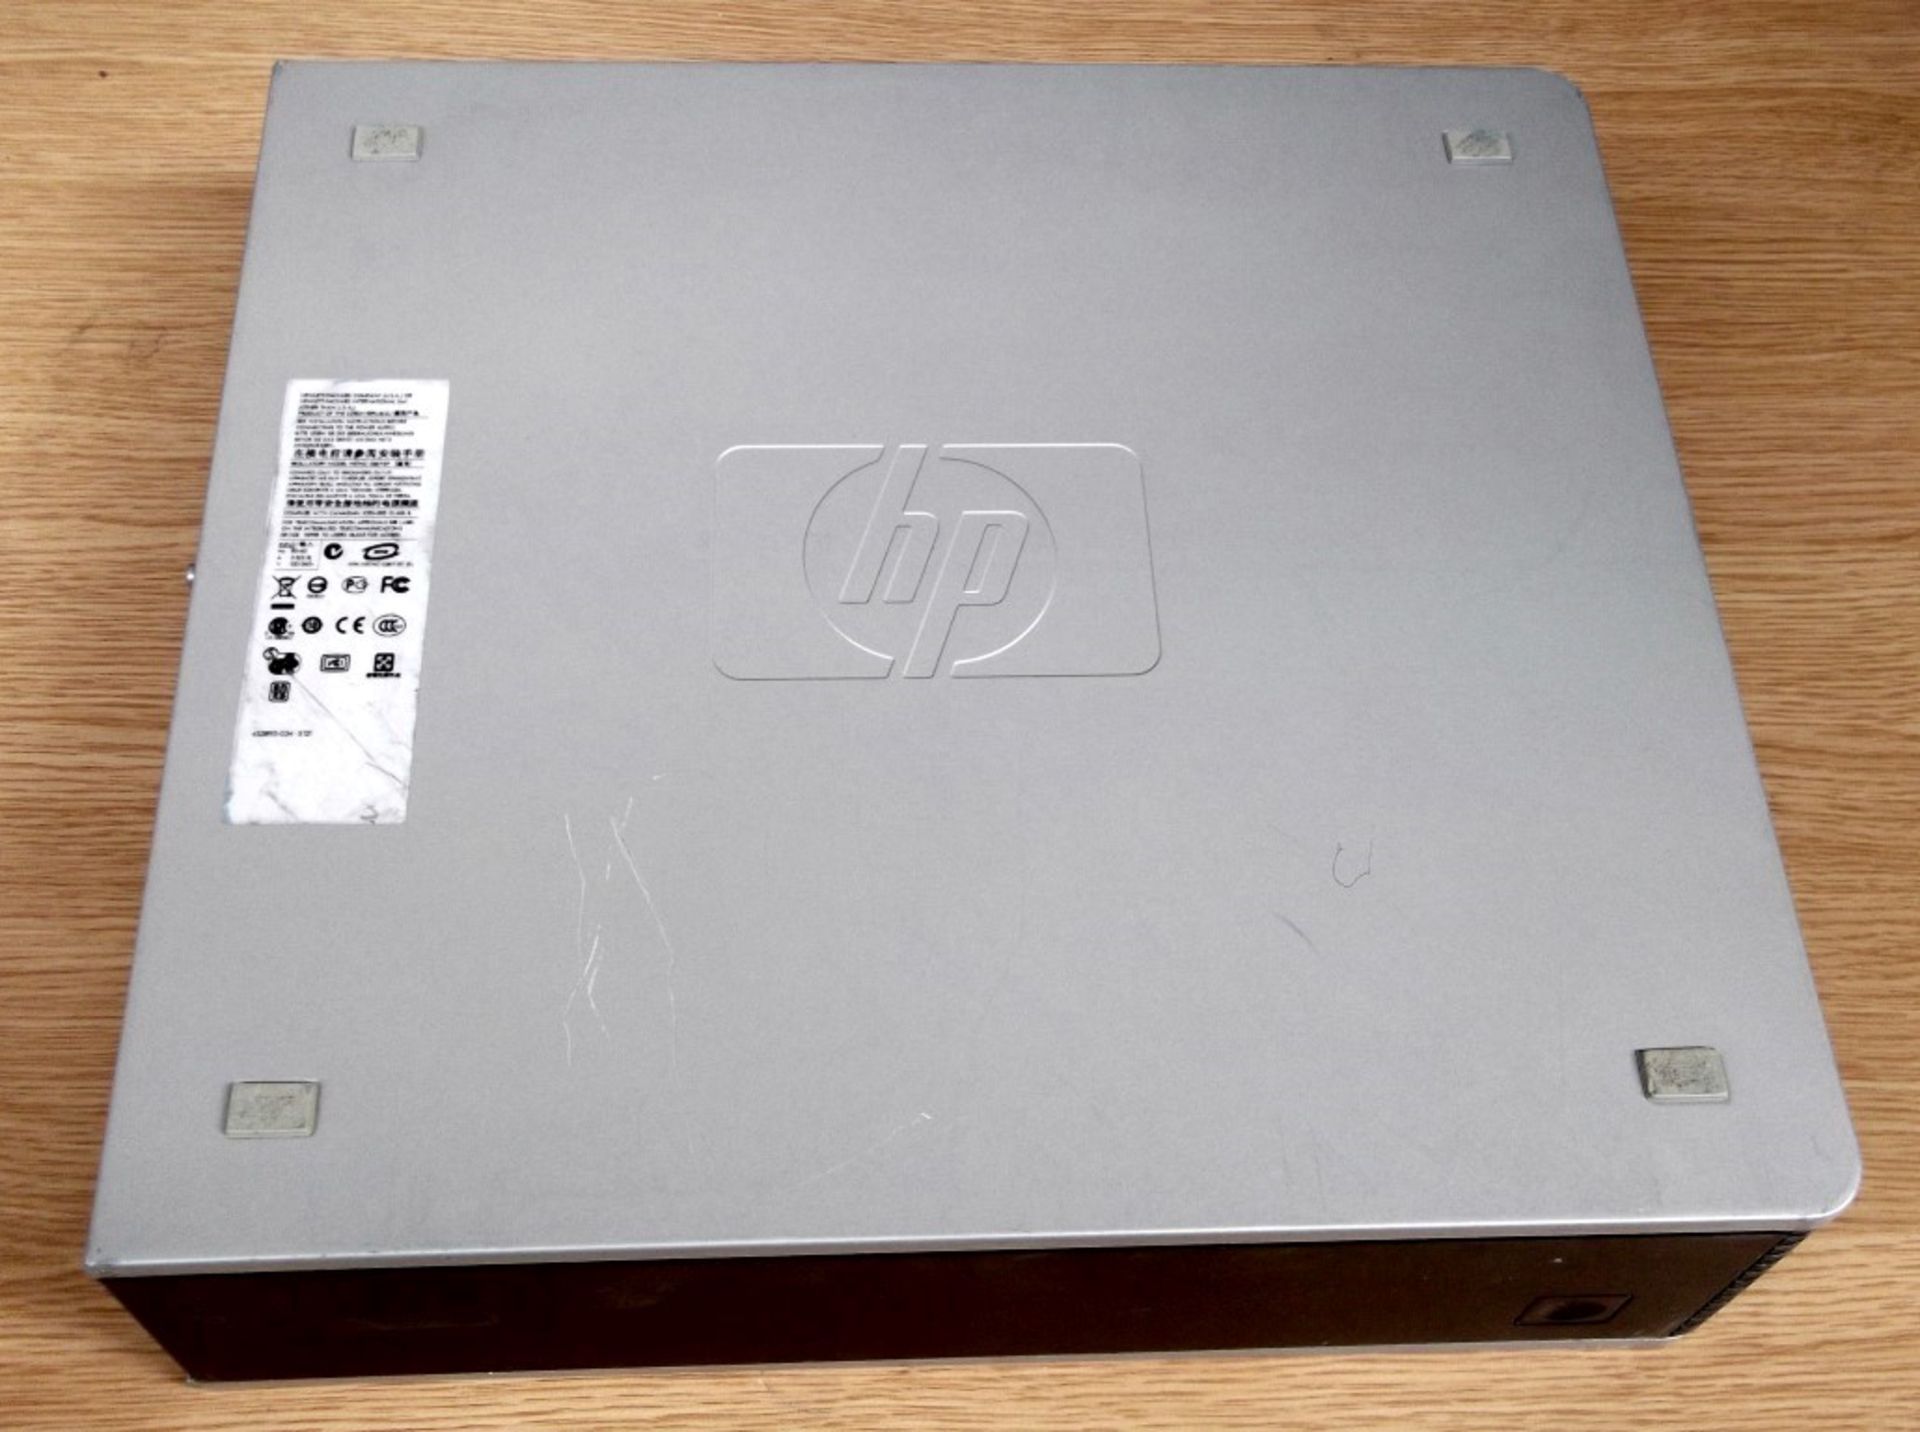 1 x HP DC7800 Desktop Computer - Intel Core 2 Duo 2.66 Ghz / 4gb Ram - HARD DISK DRIVE REMOVED - - Image 6 of 7